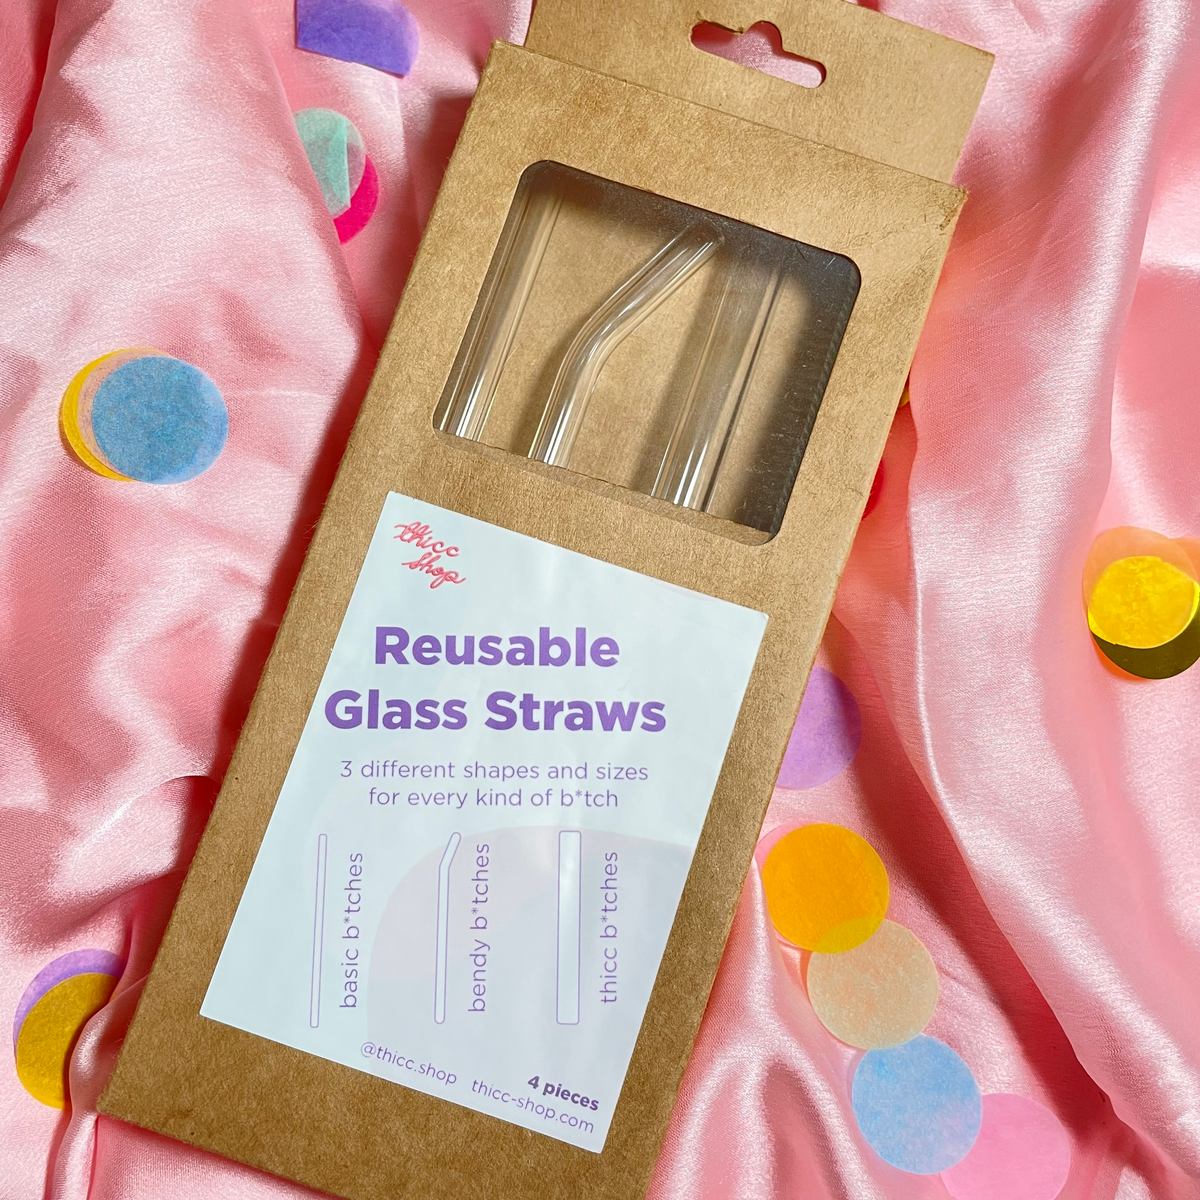 Thicc 4 piece Reusable Glass Straws – ThiccShop